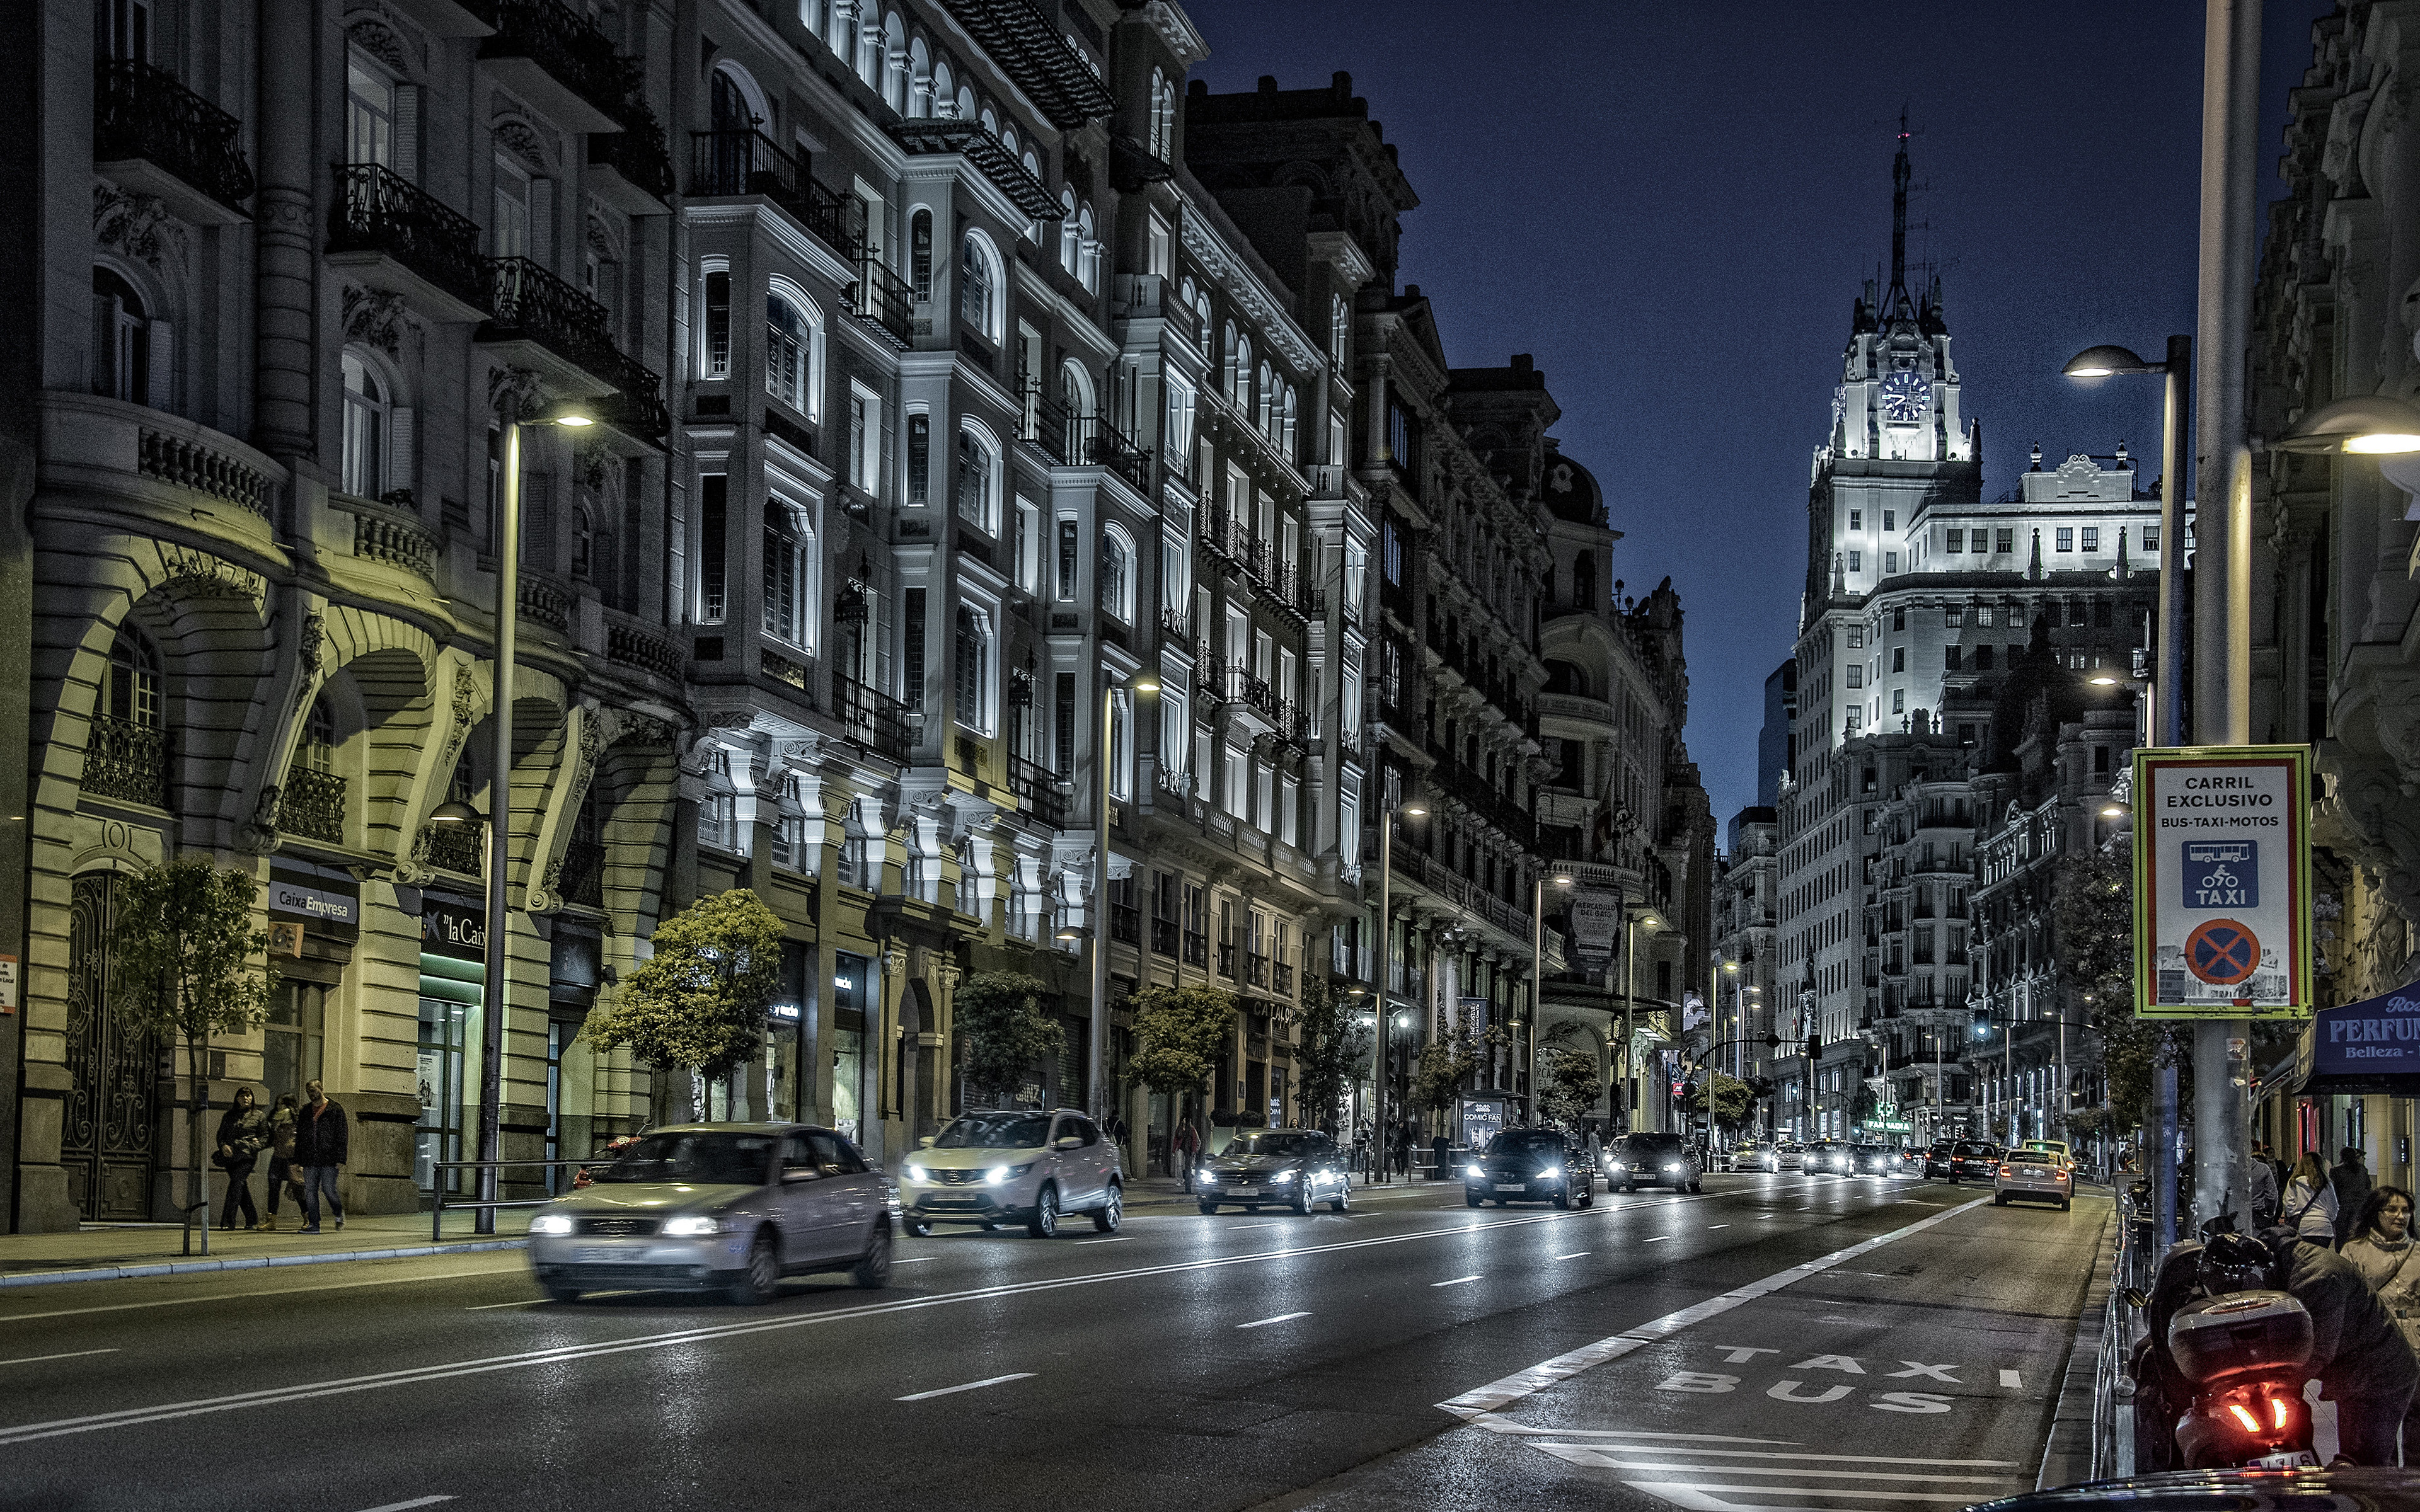 Download wallpaper Madrid, 4k, street, nightscapes, spanish cities, Spain, Europe, Madrid at night for desktop with resolution 3840x2400. High Quality HD picture wallpaper